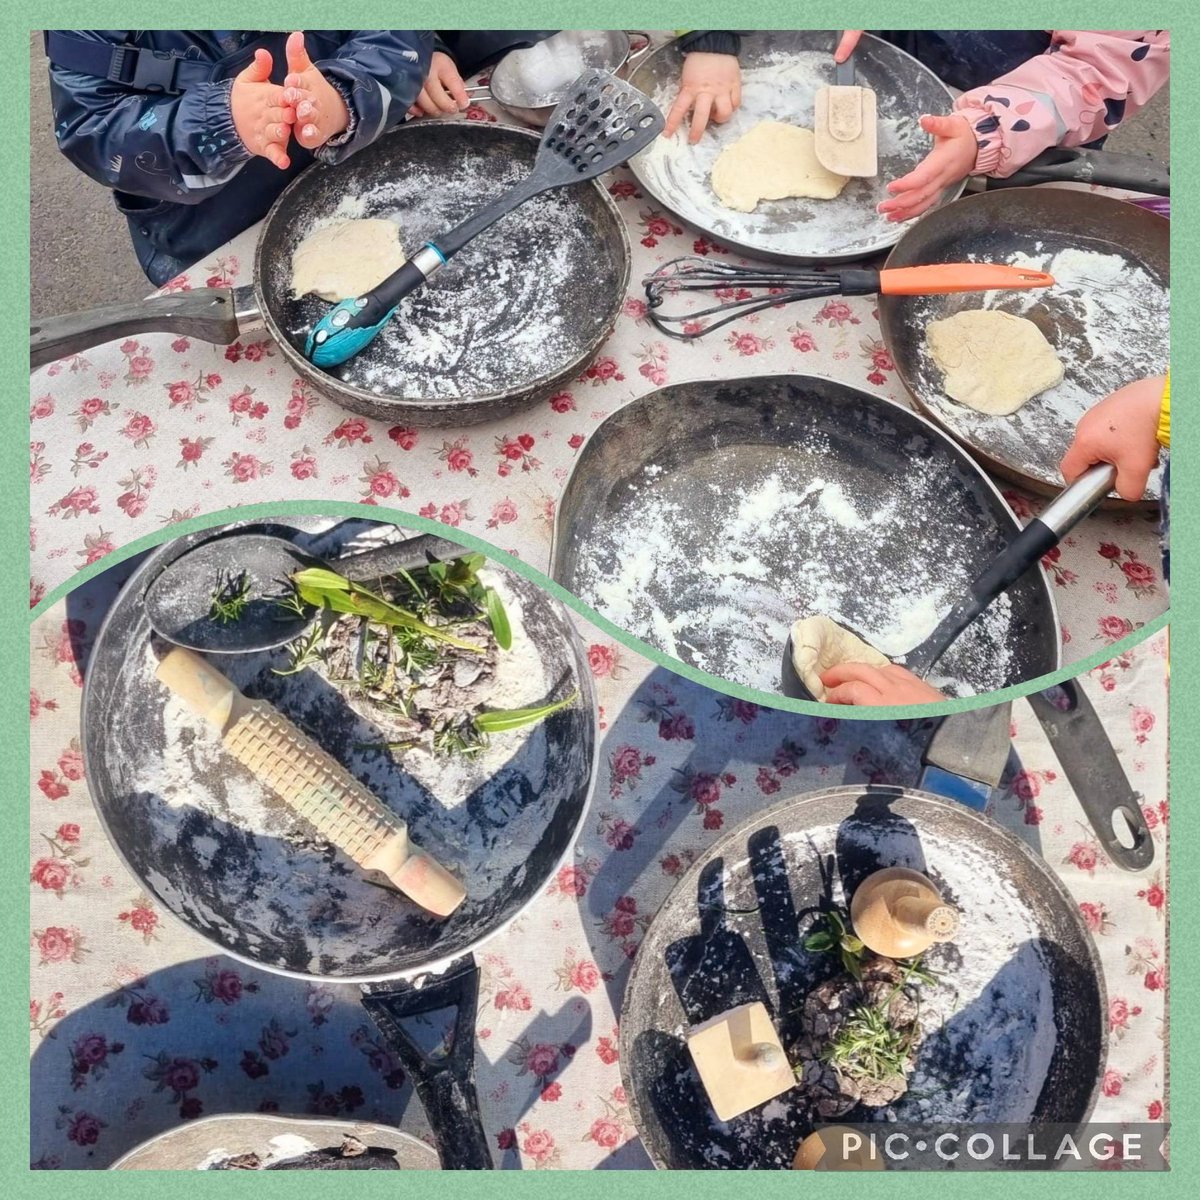 Toddler pancake creations in the mud kitchen - time and space to interpret and recreate experiences in their own way. Calm purposeful play #slowpedagogy #outdoorlearning